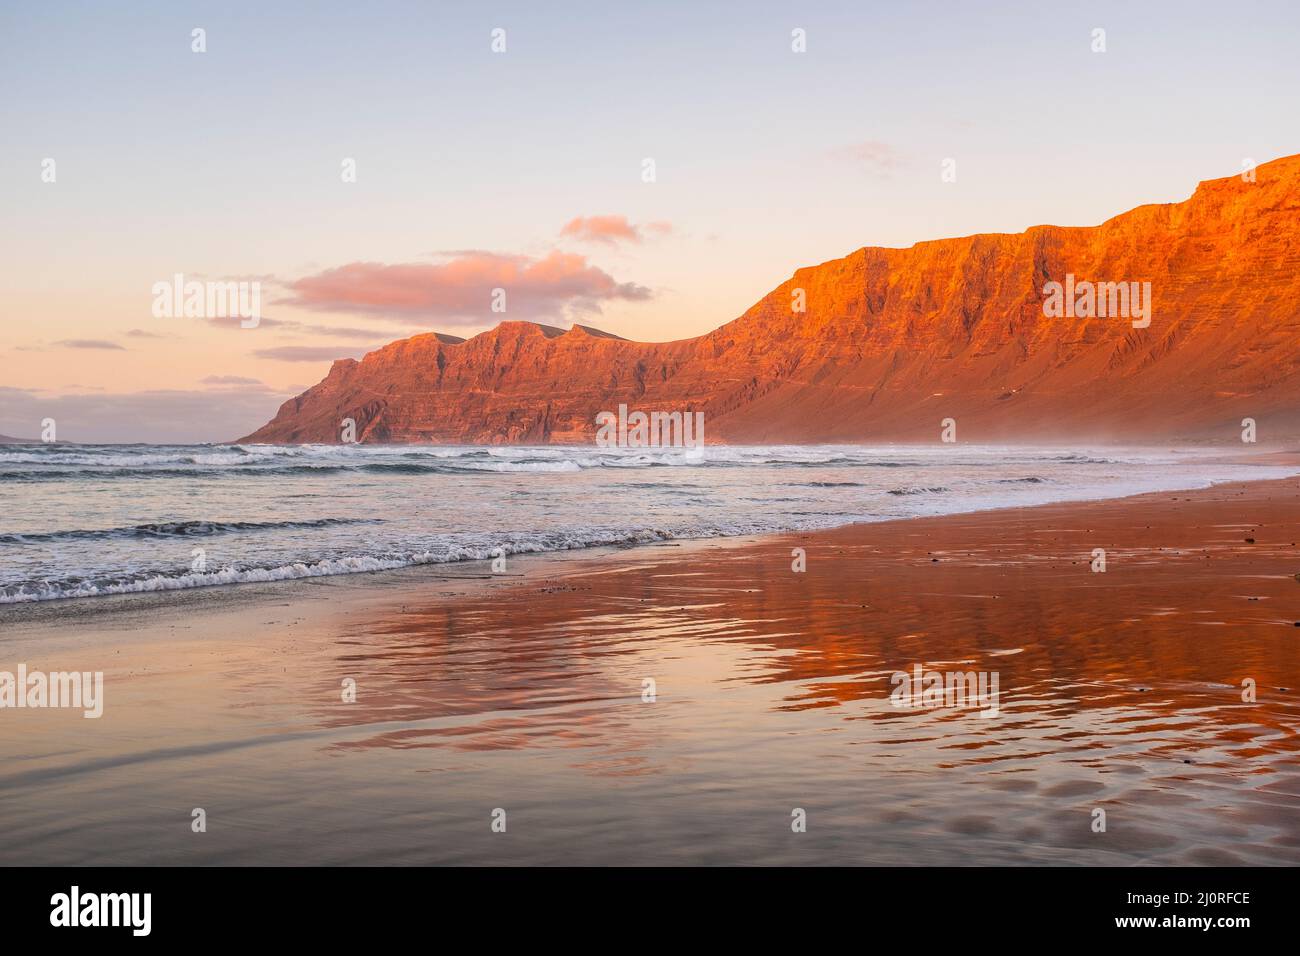 View of amazing beach during red sunset time. Ocean water and shore. Mountains in background with clear sky. Summer holiday vacationand scenic beautif Stock Photo